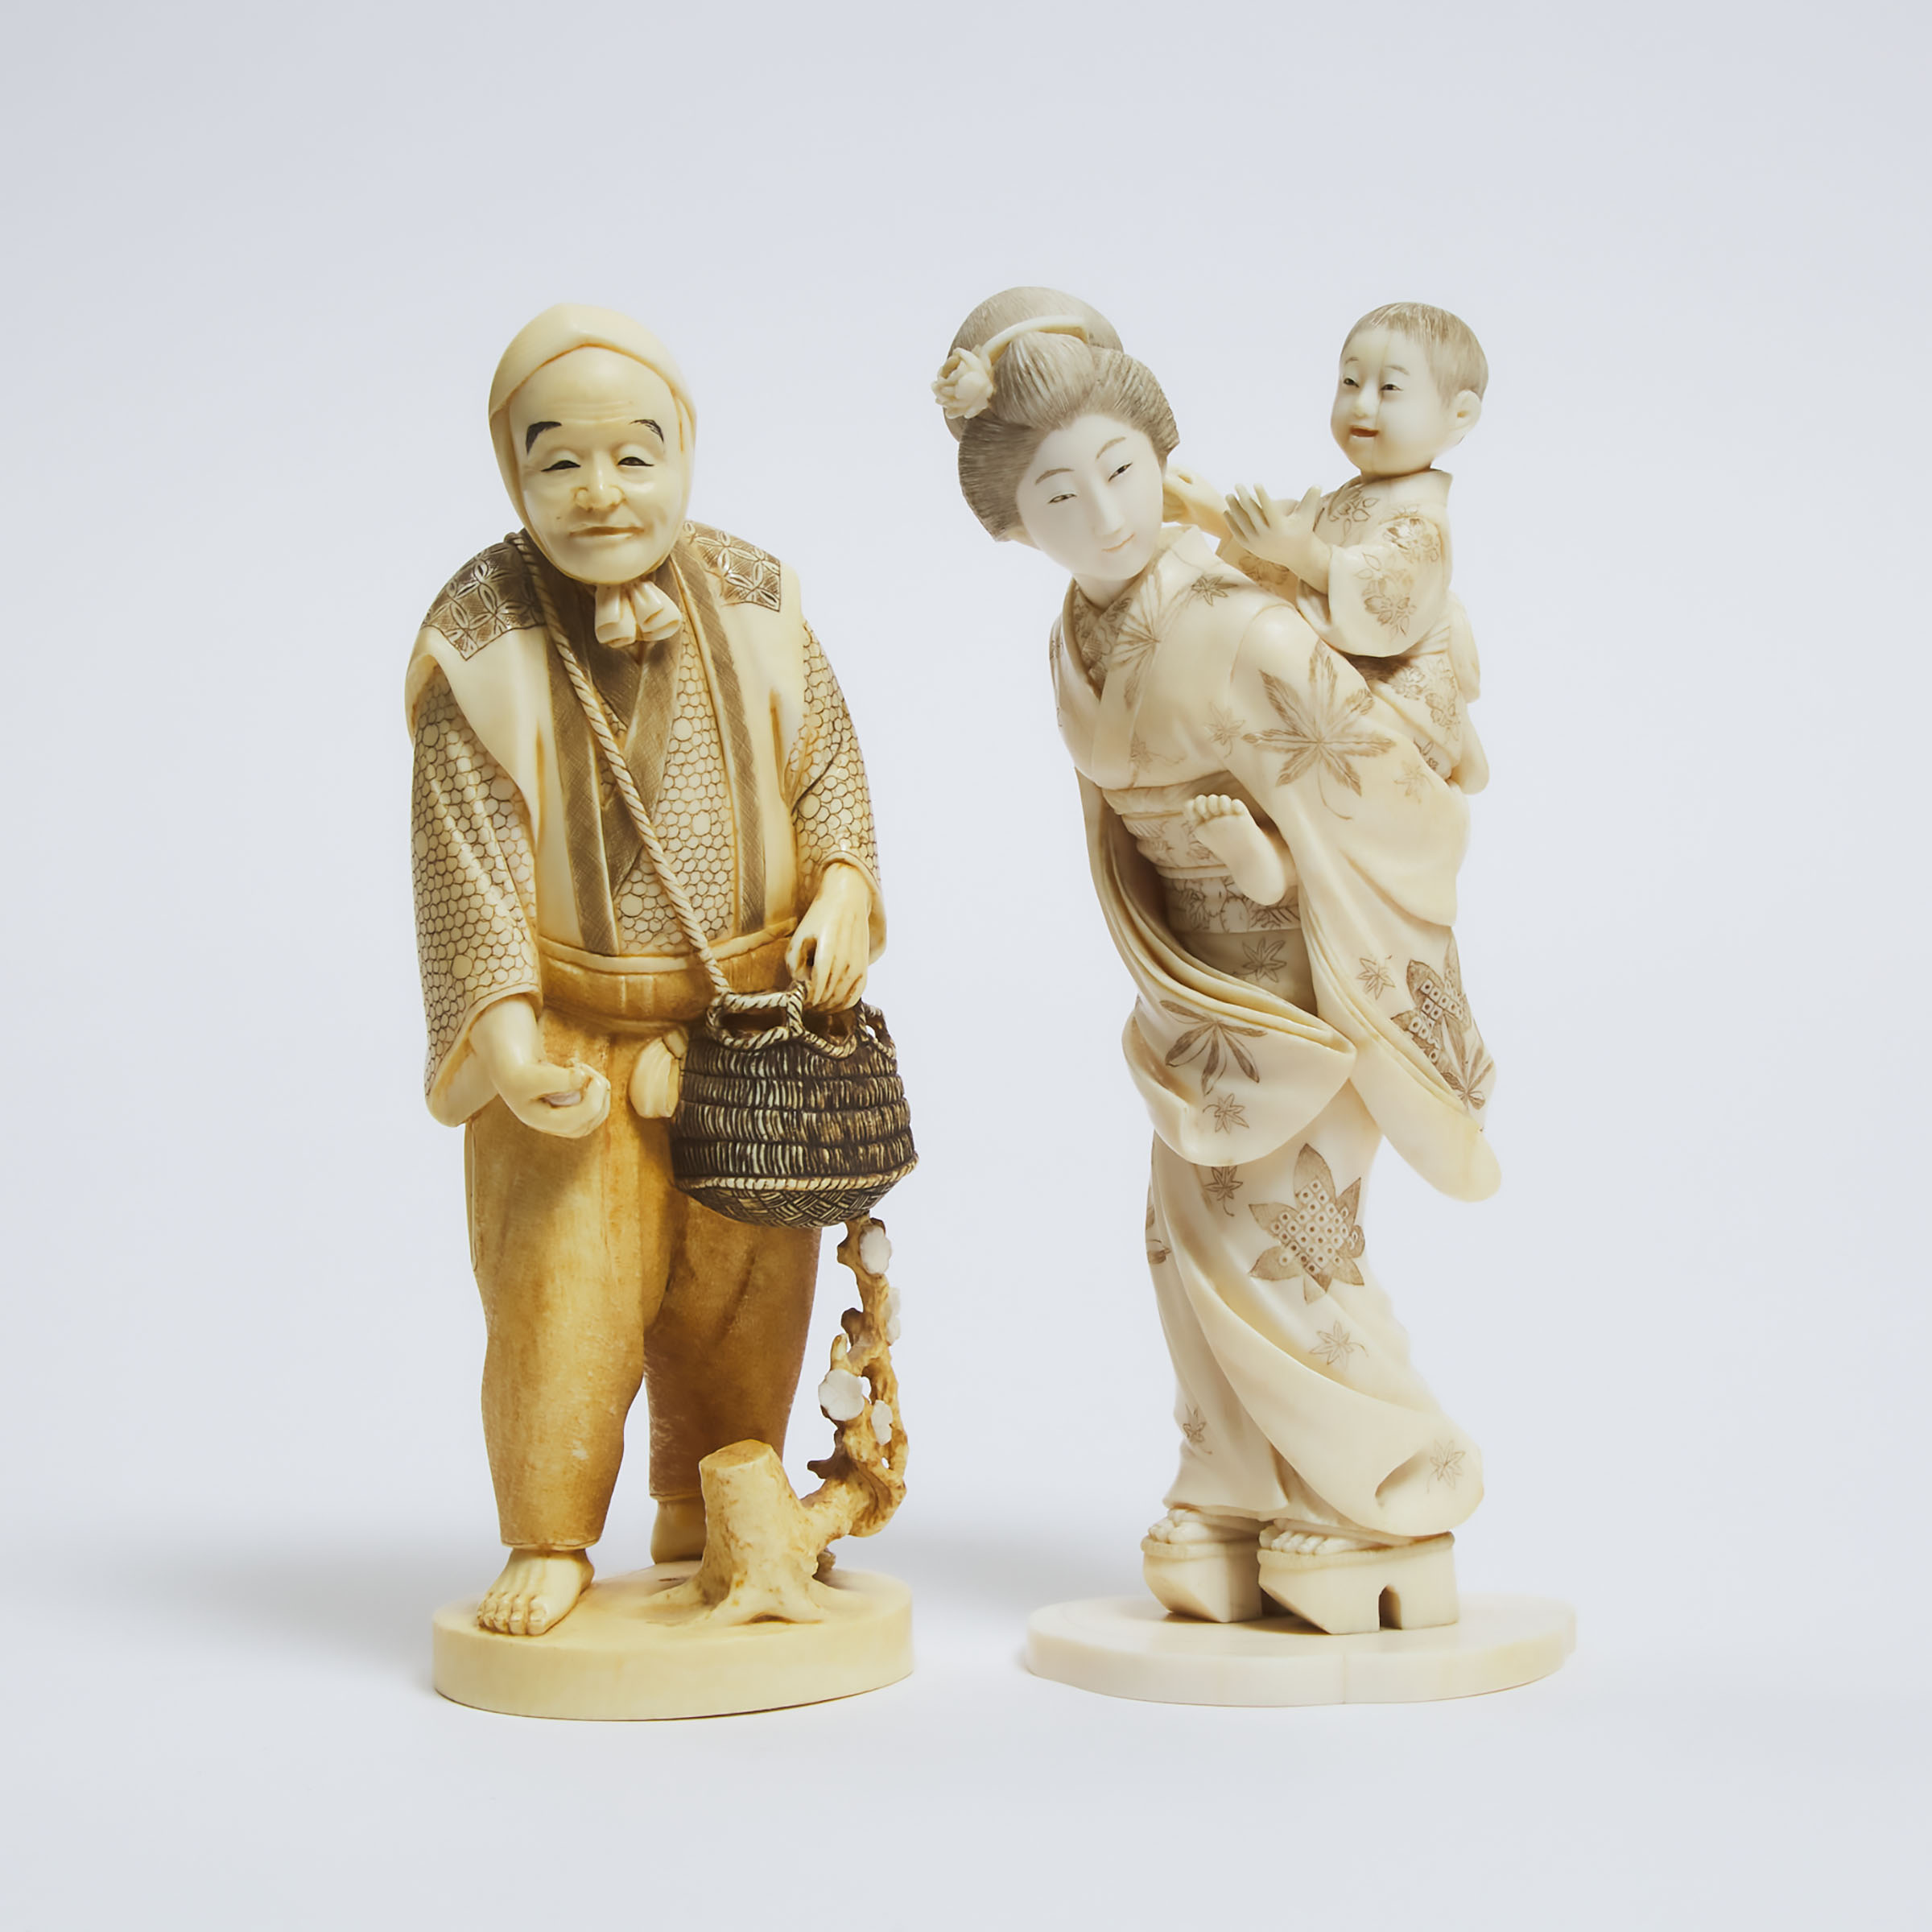 Two Ivory Okimono of a Lady and Child and a Farmer, One Signed Tomochika, Meiji Period (1868-1912)